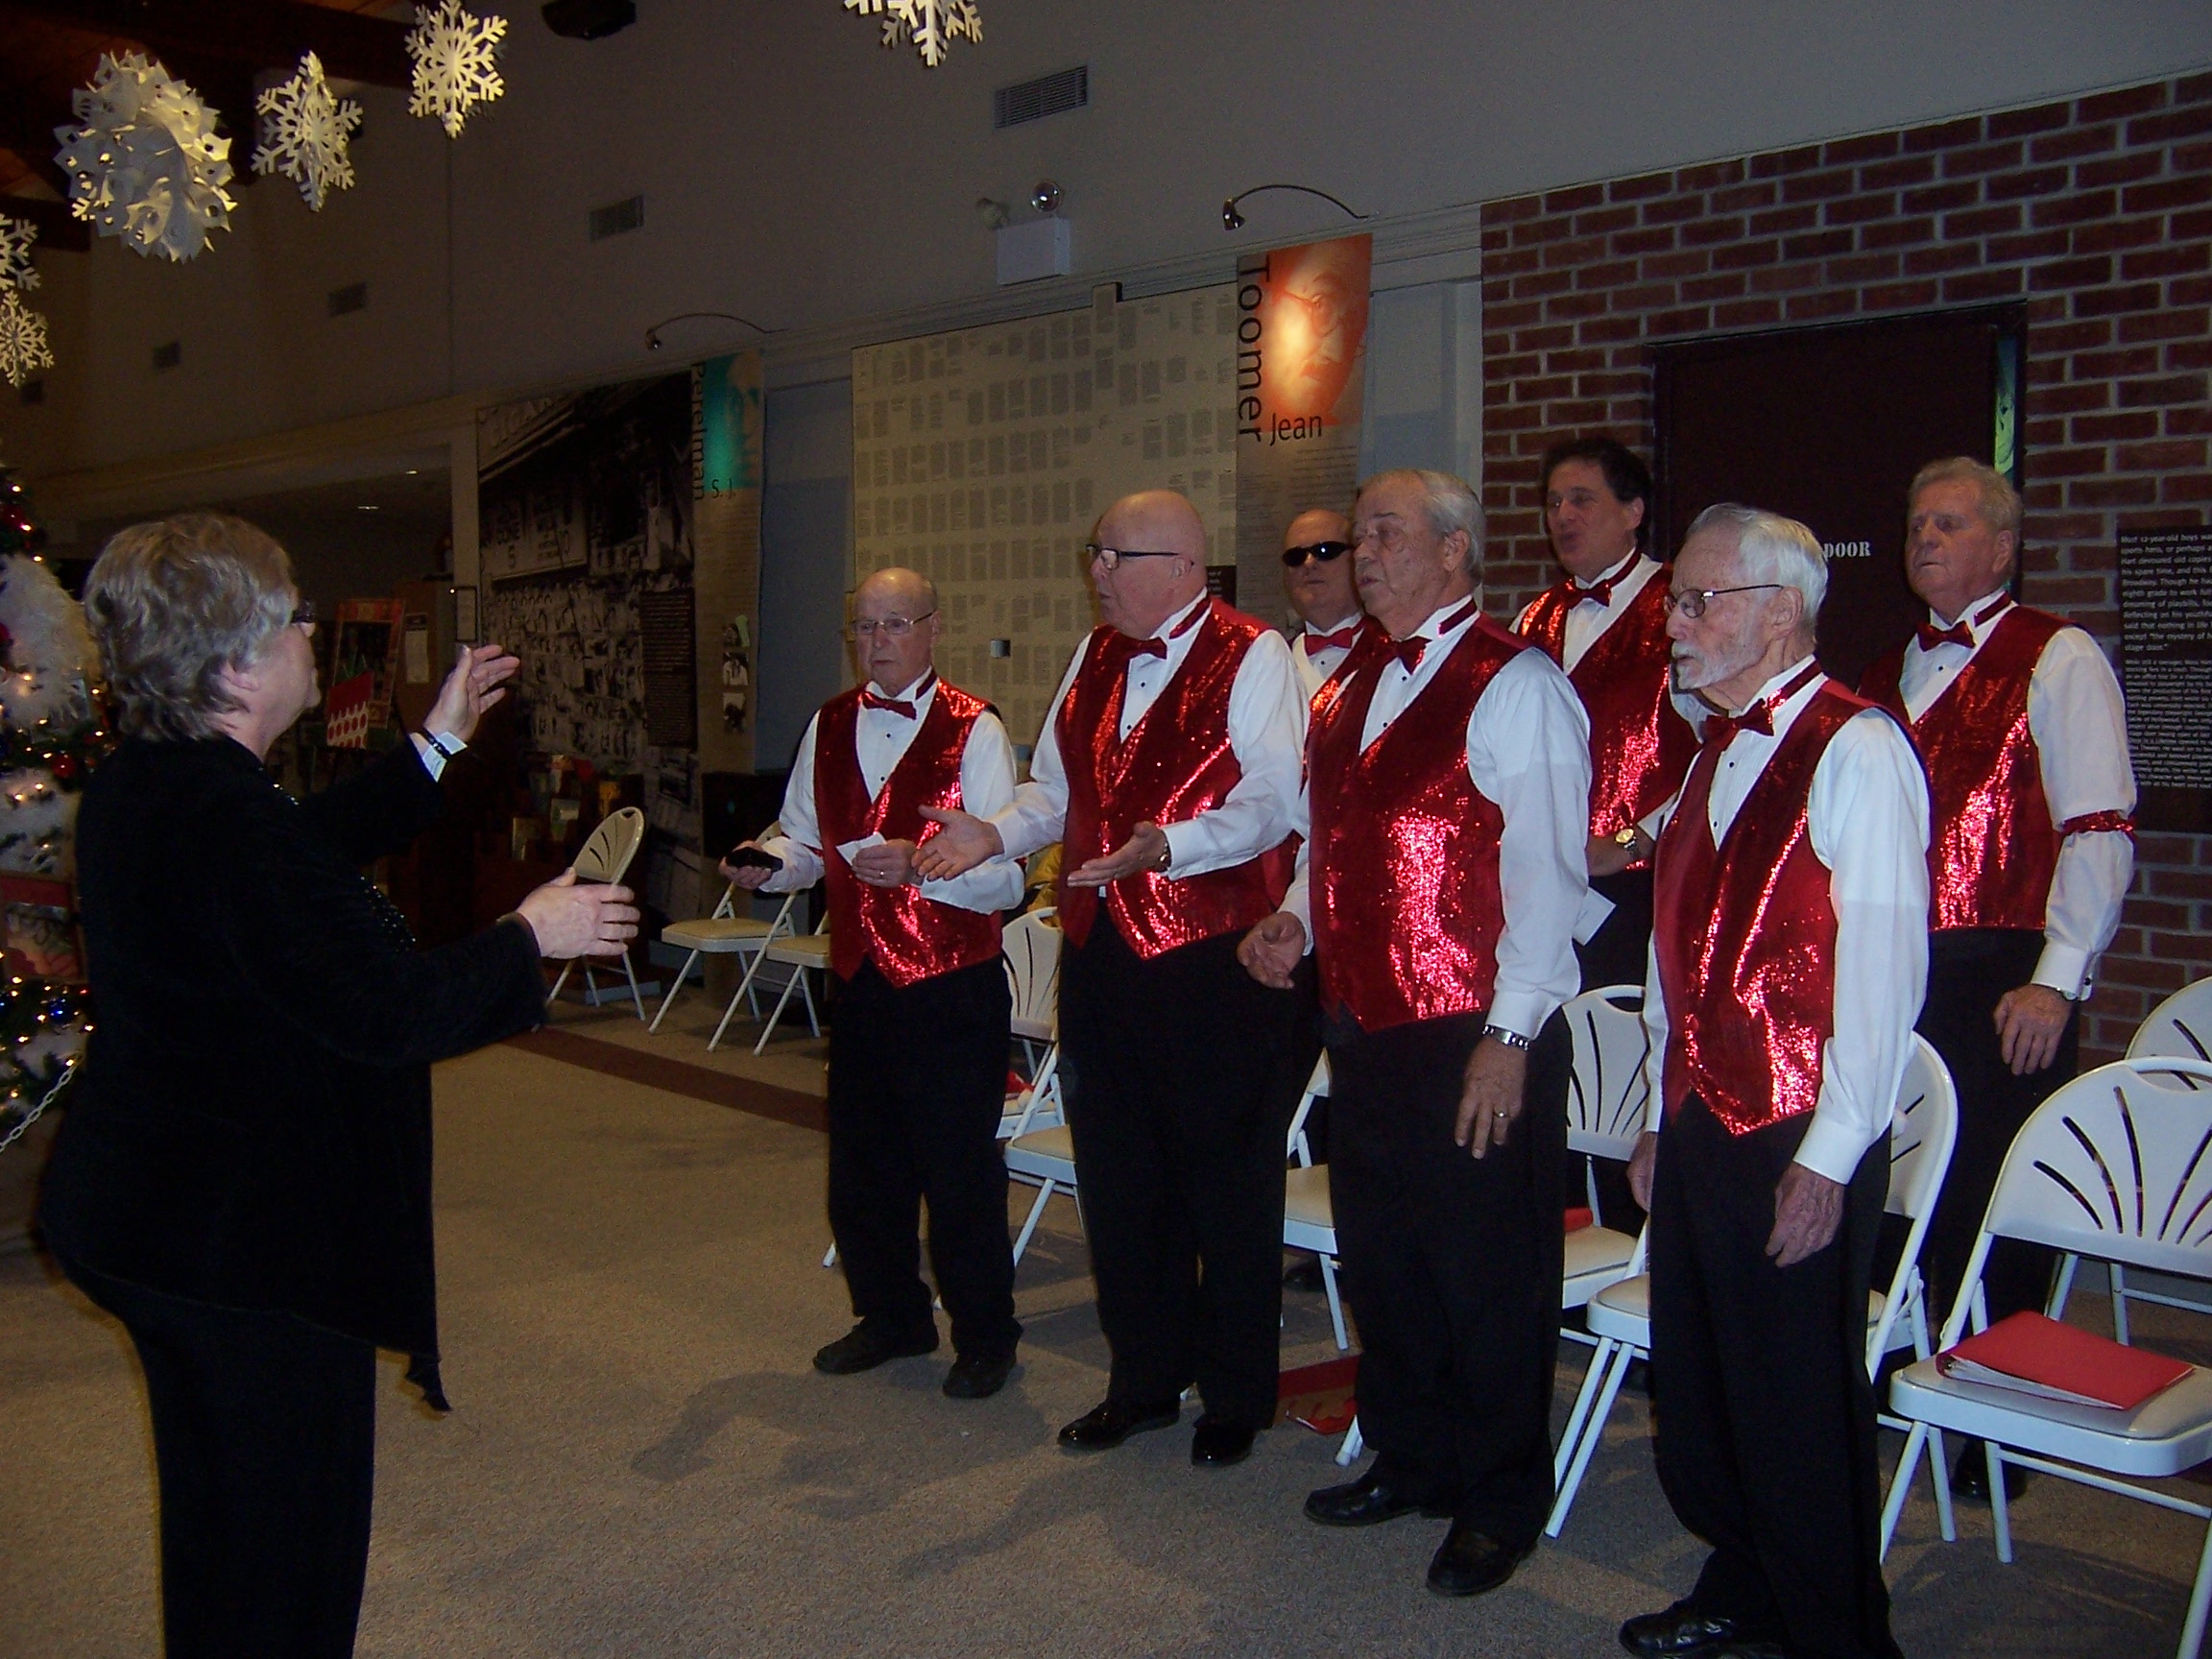 The chorus singing, onstage, in festive attire (1 of 4)